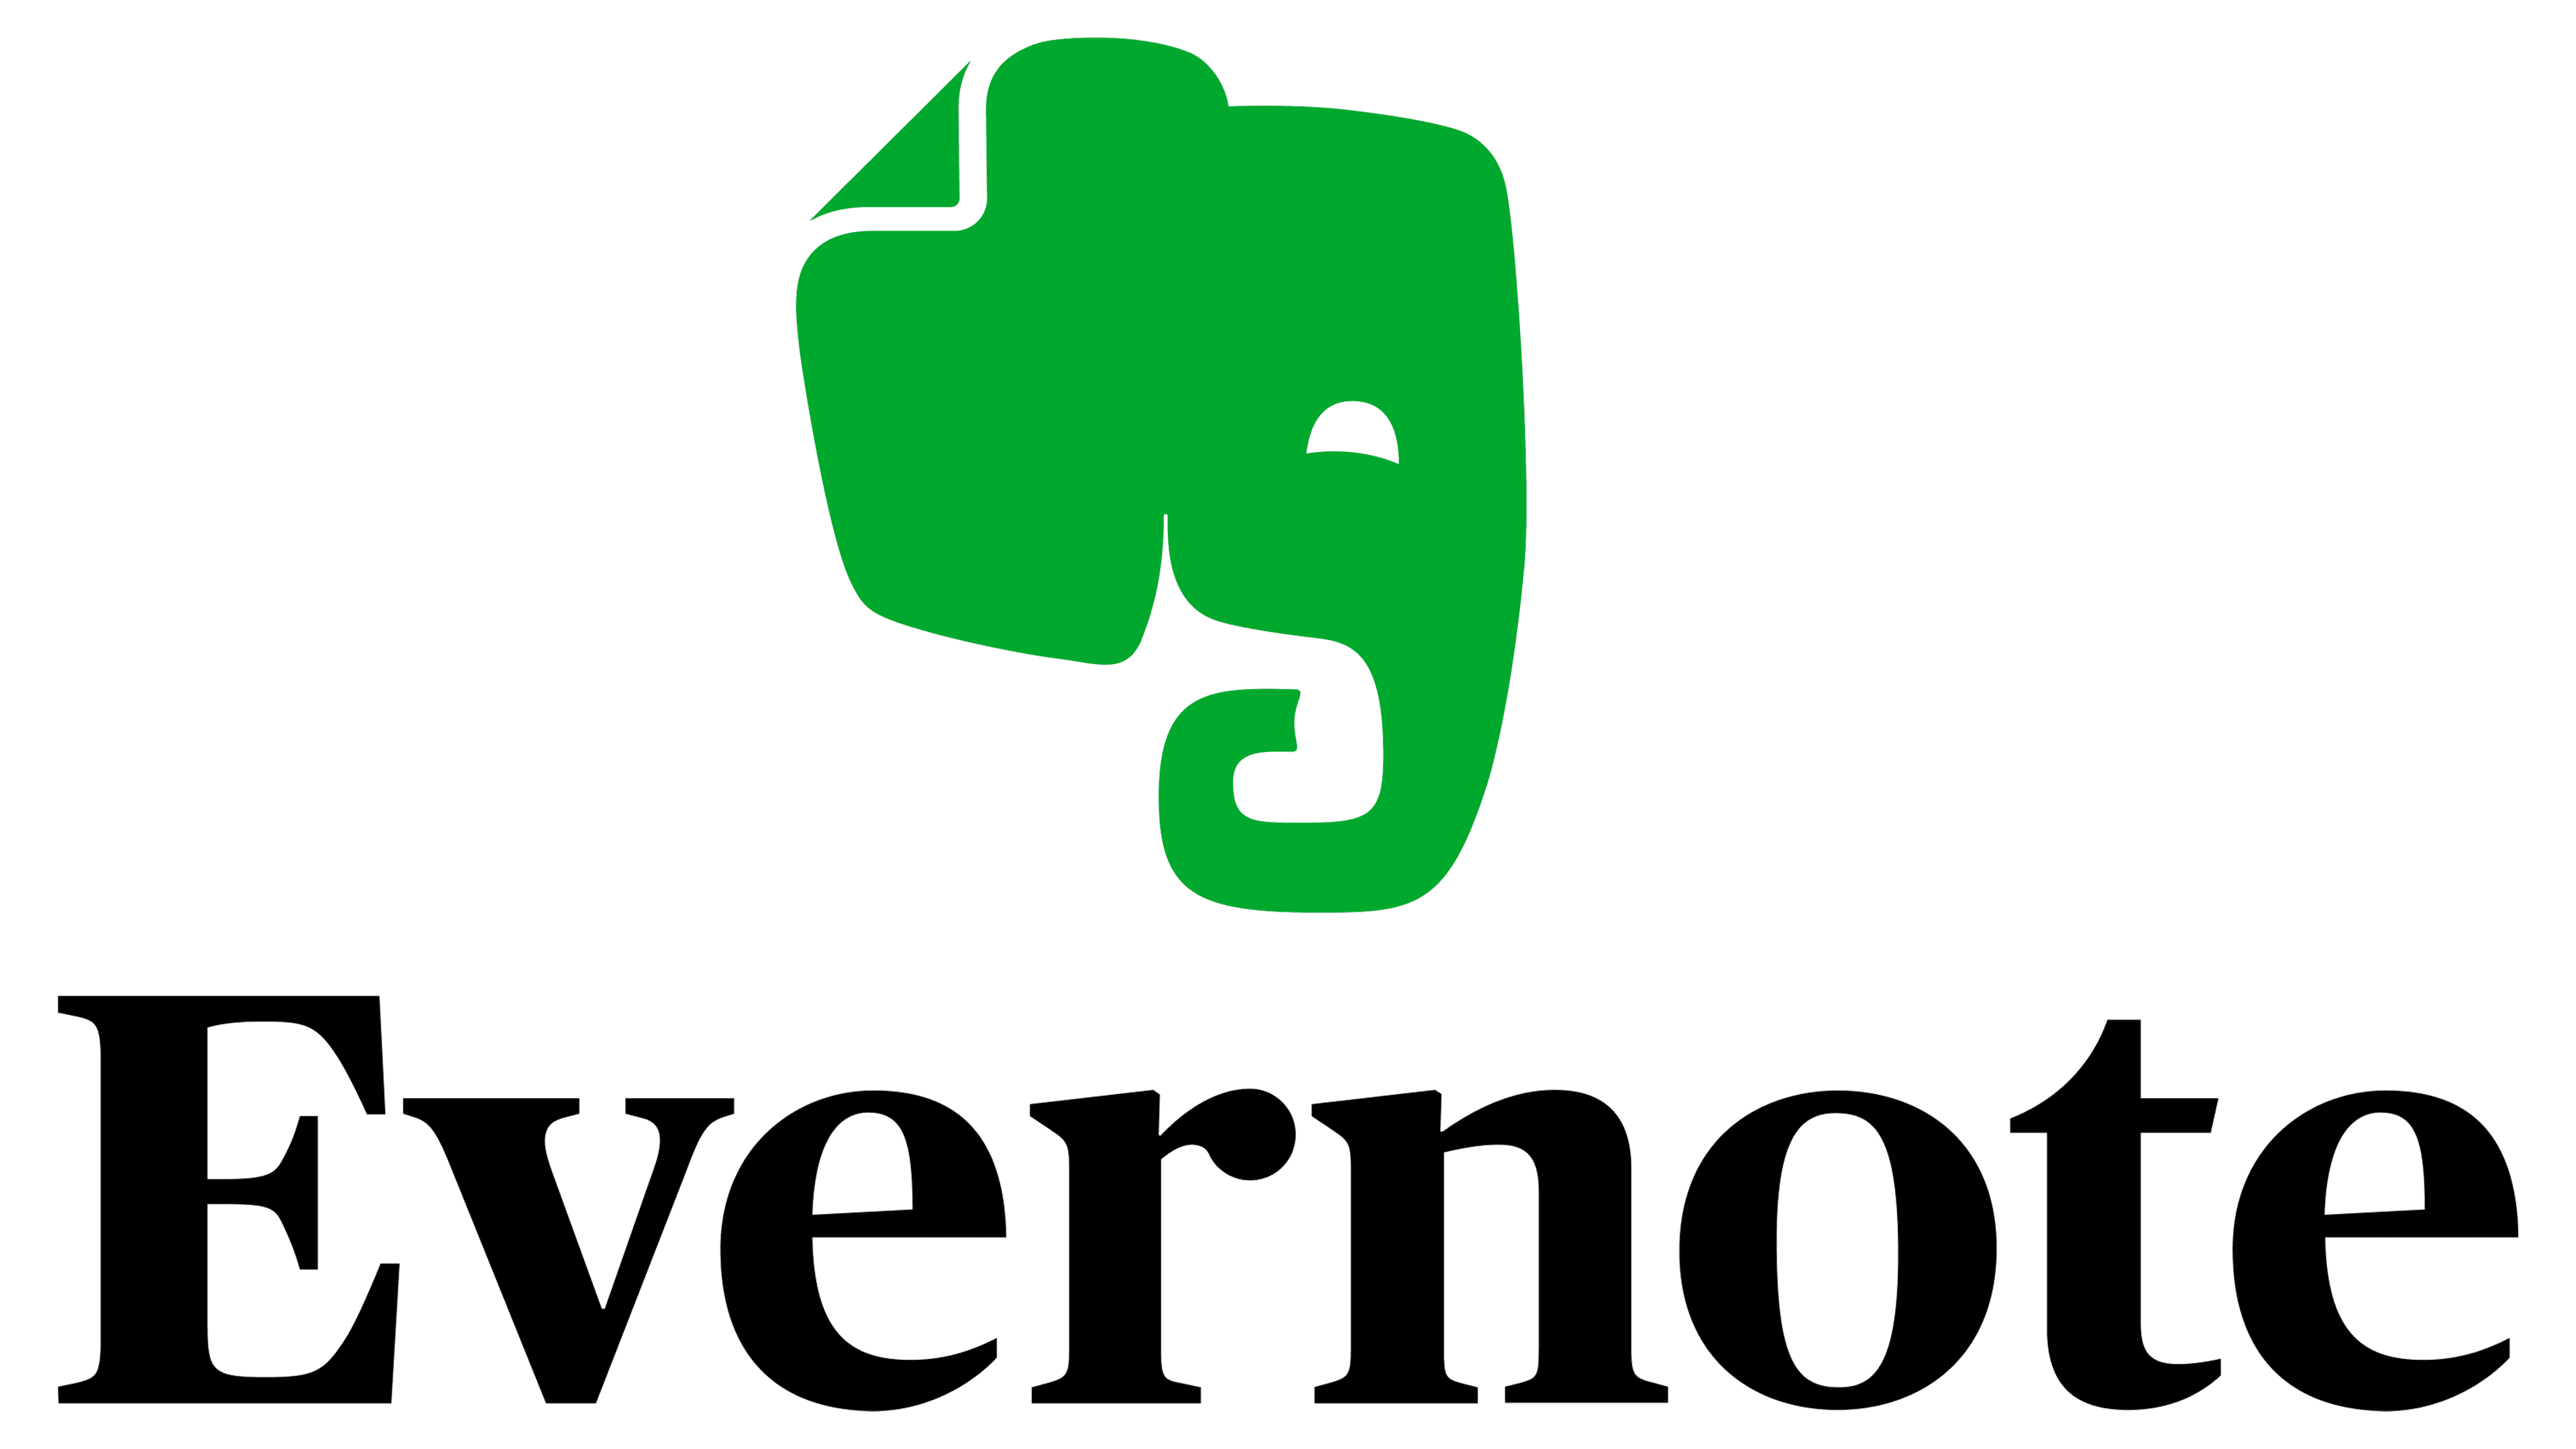 Evernote Logo, symbol, meaning, history, PNG, brand